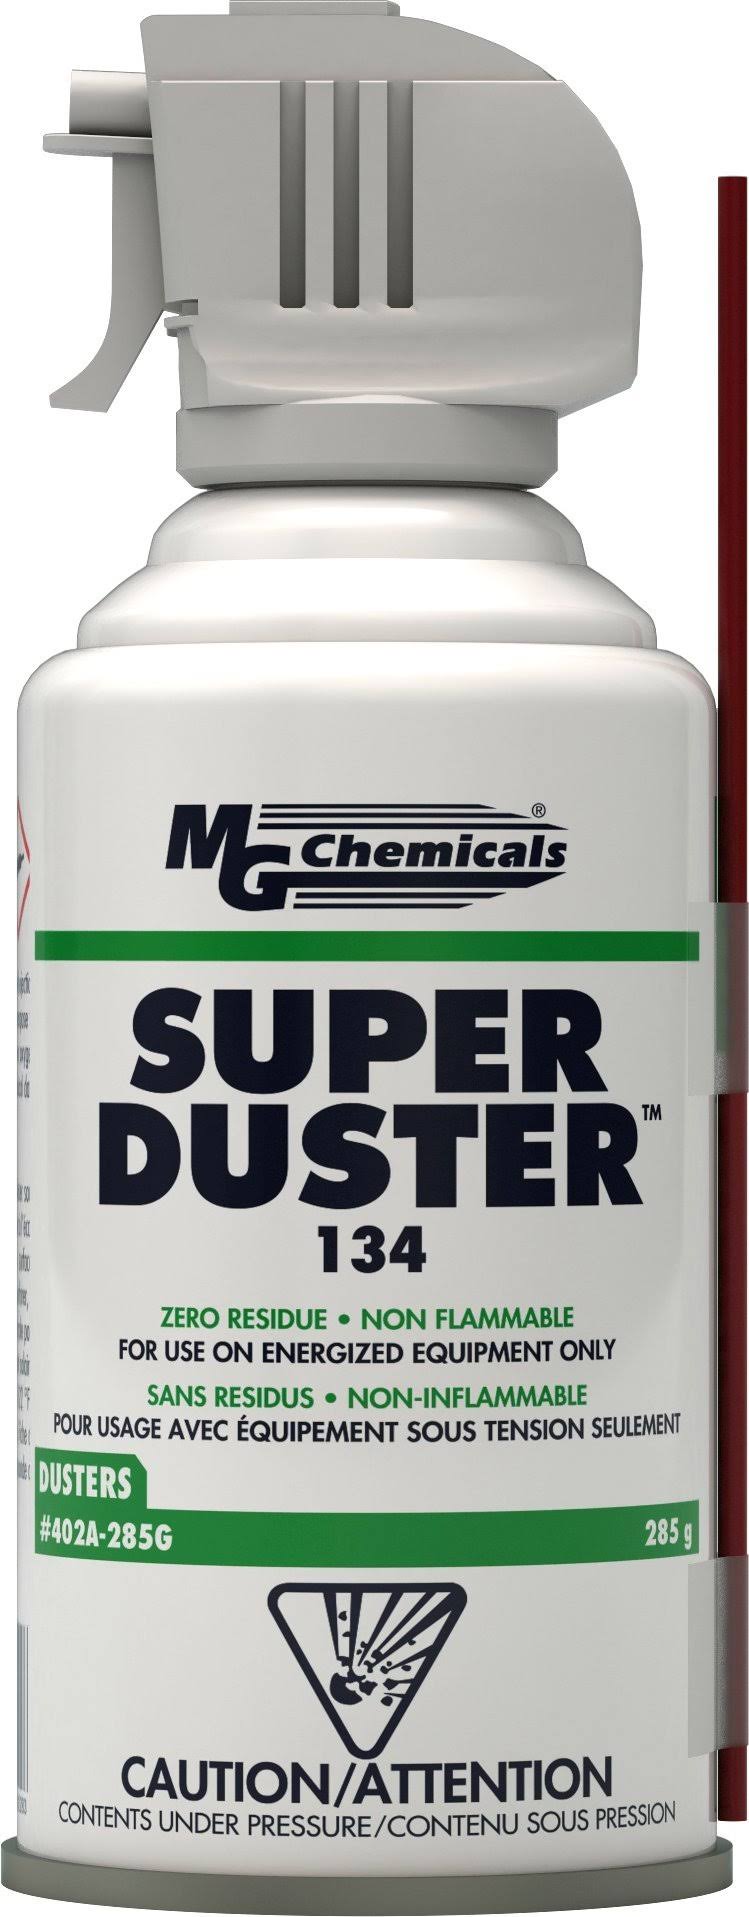 MG Chemicals Super Duster - 285g